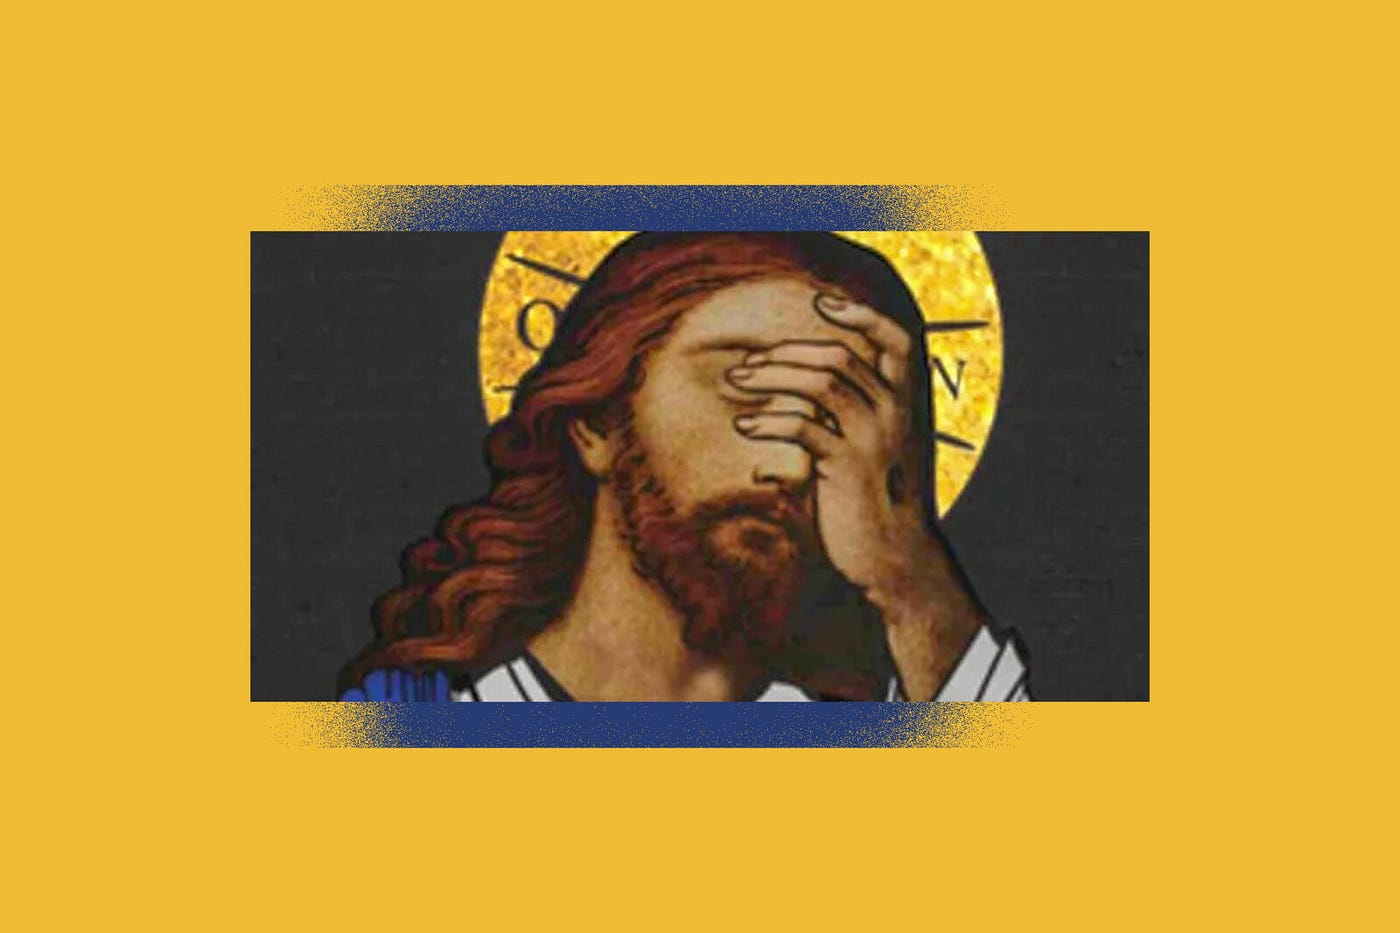 Jesus with his hand covering his face in frustration